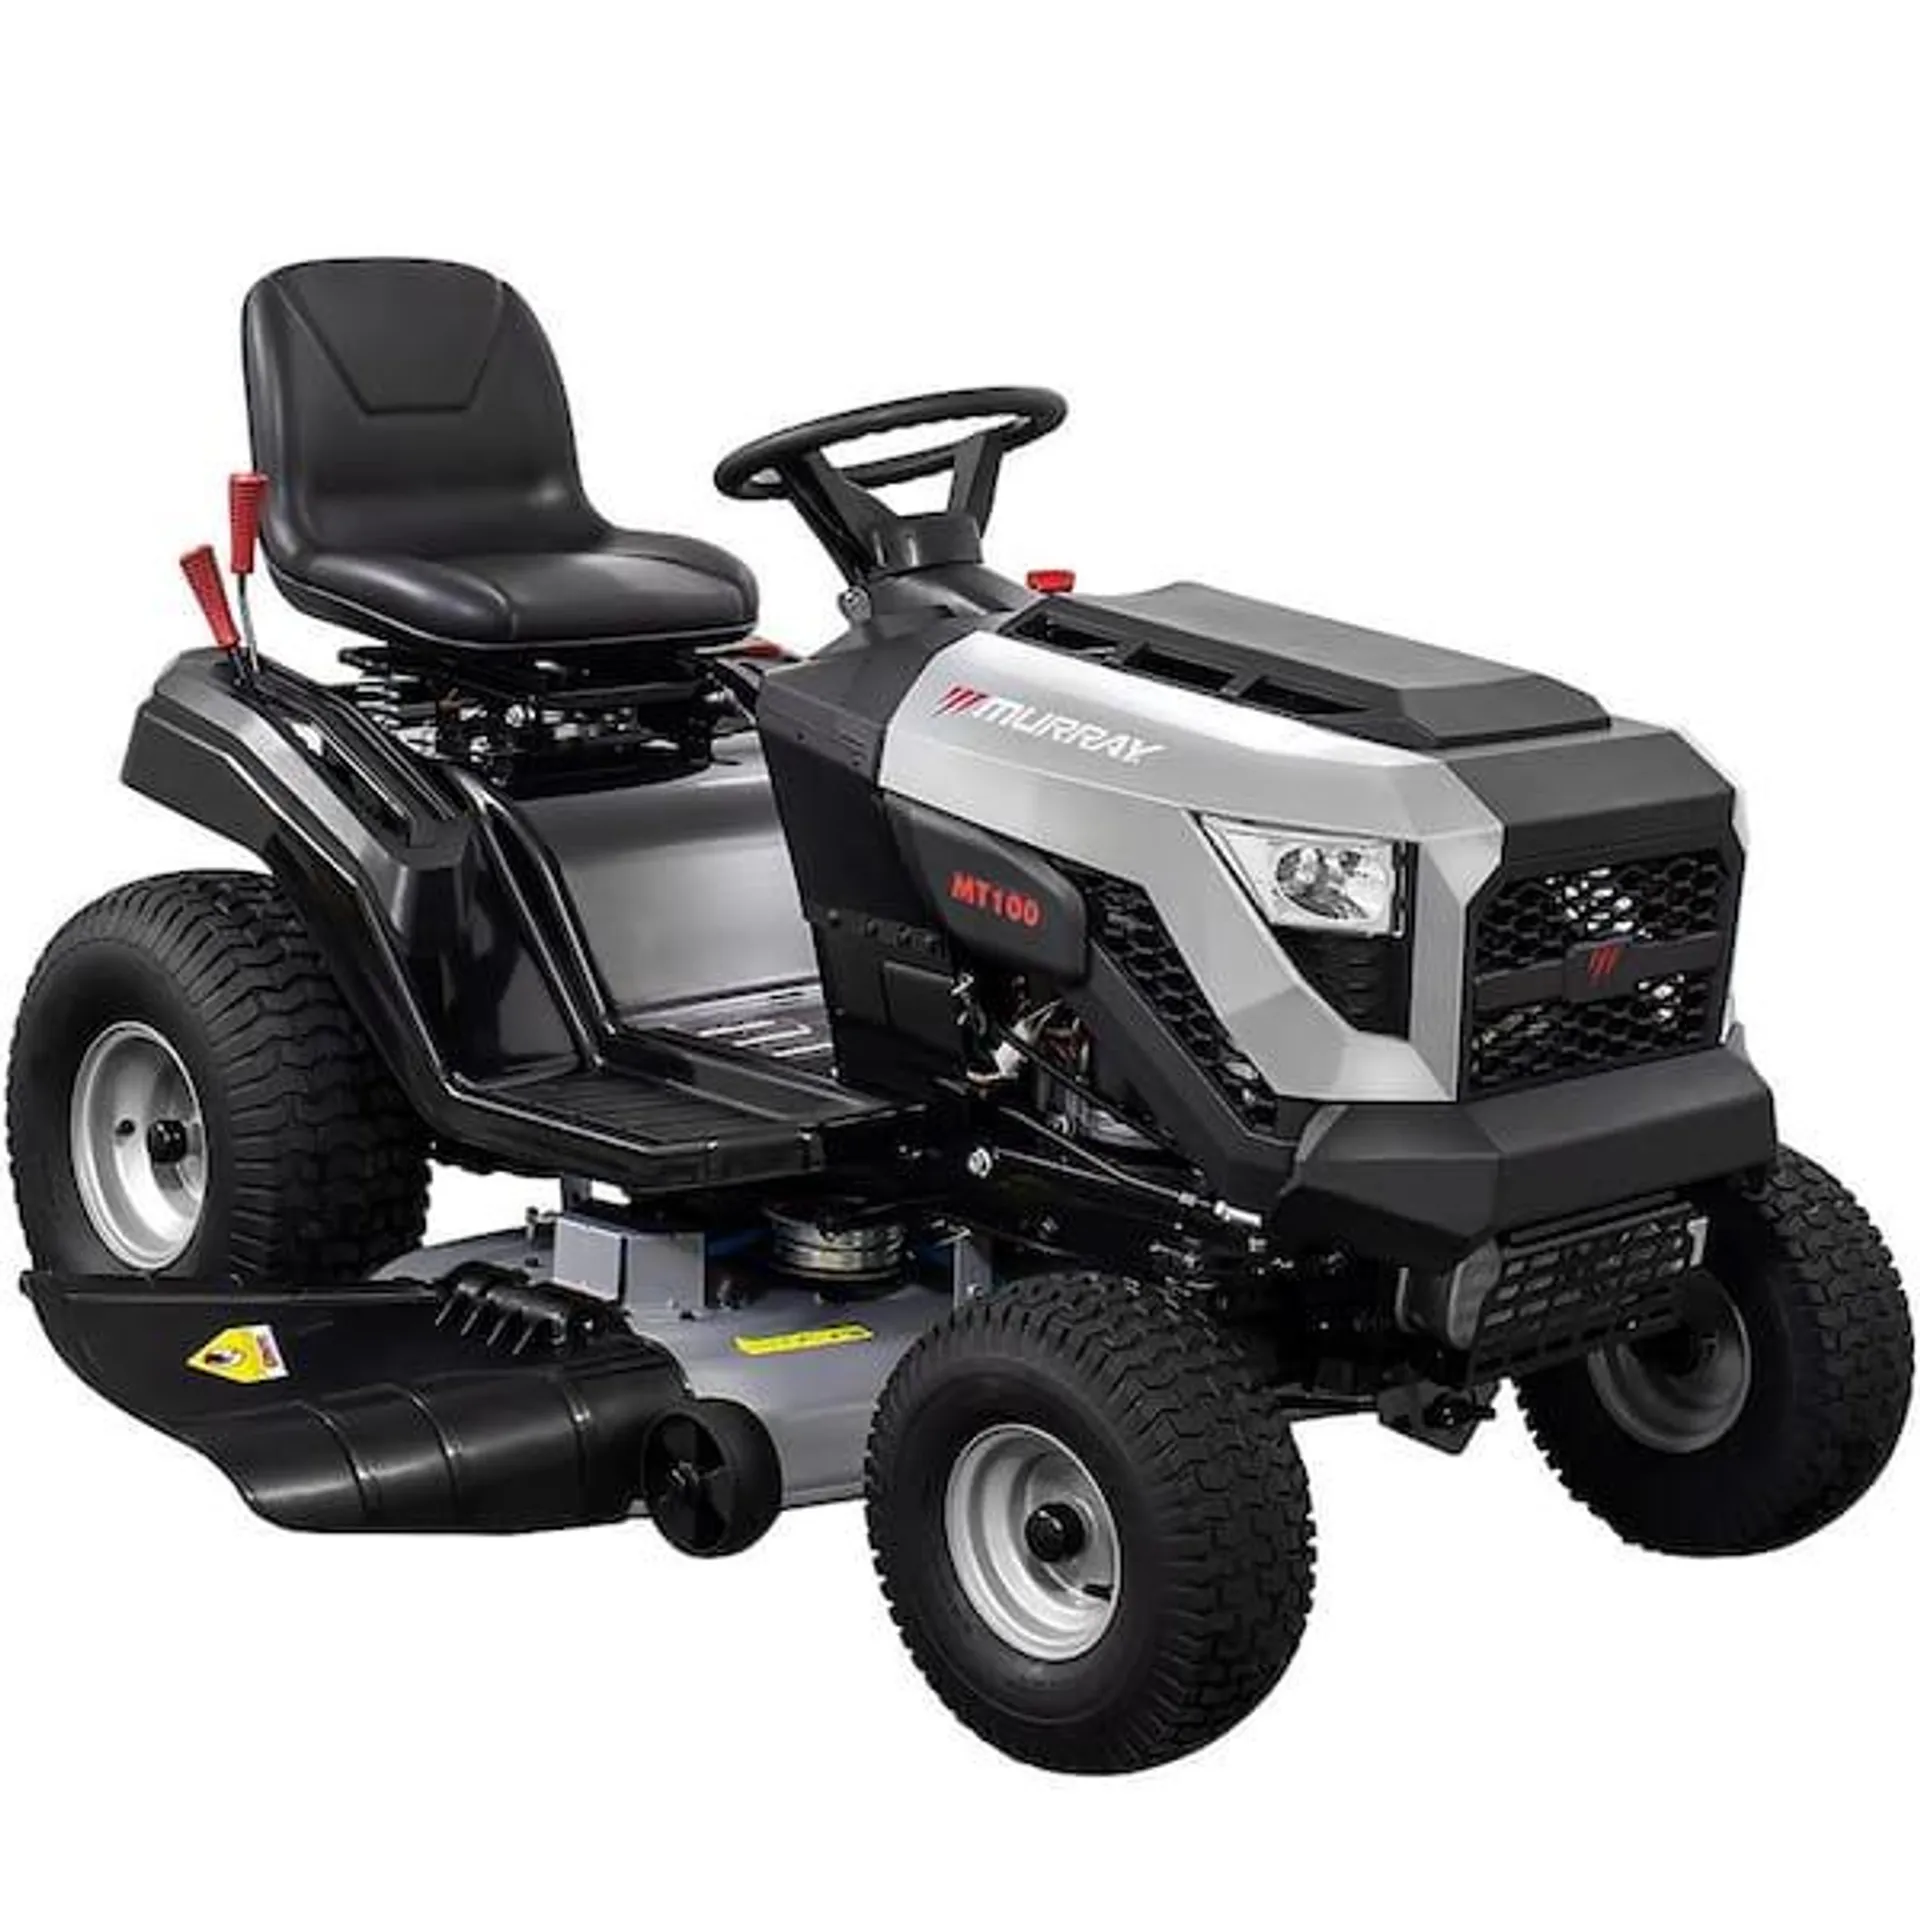 MT100 42 in. 13.5 HP 500cc E1350 Series Briggs and Stratton Engine 6-Speed Manual Gas Riding Lawn Tractor Mower